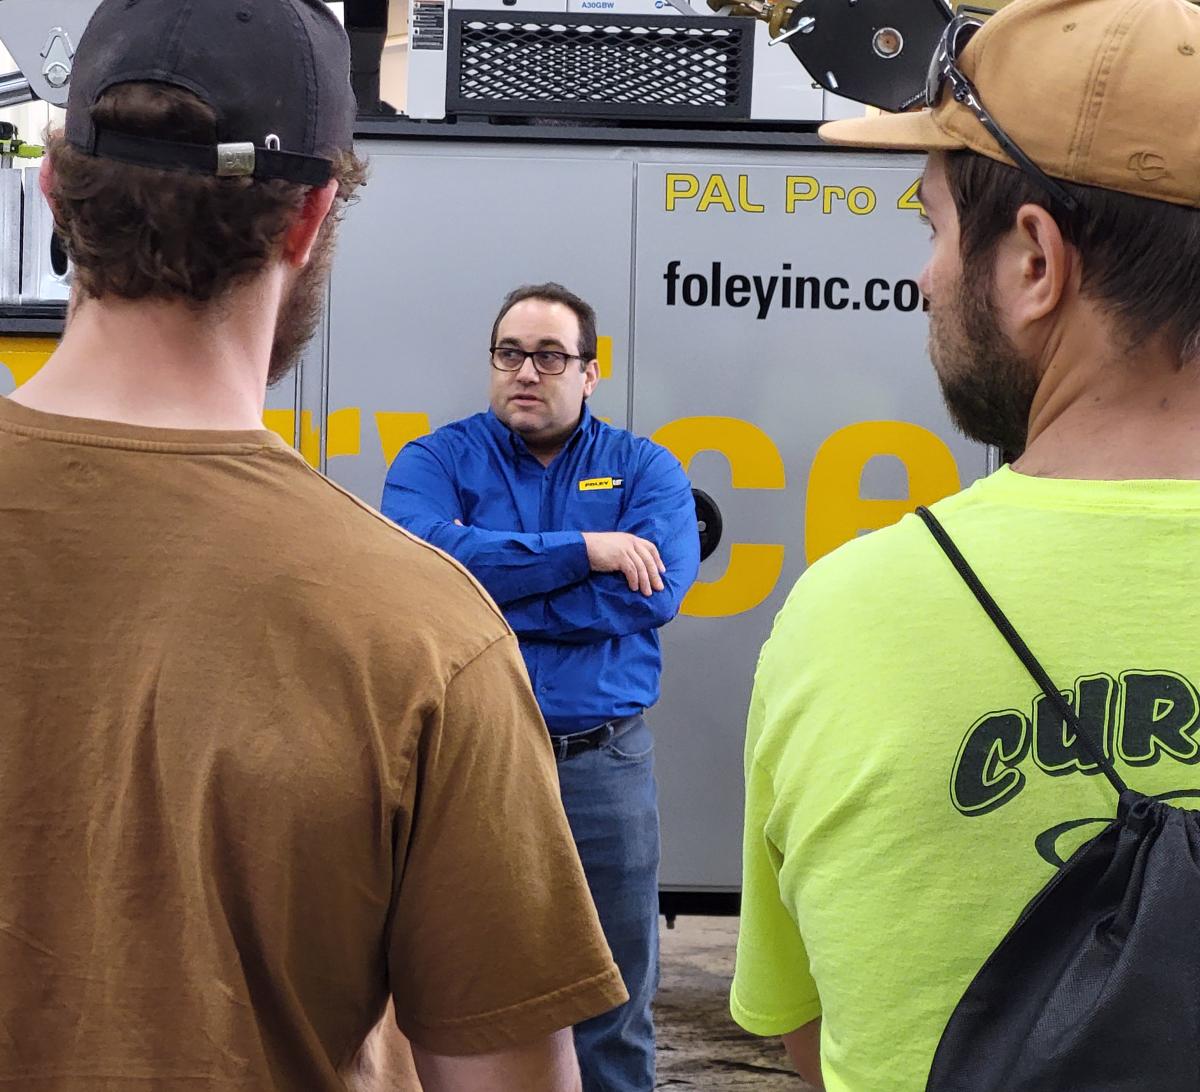  Alumnus Louis DiDonato ('00, heavy construction equipment technology: Caterpillar emphasis) dialogues with students in his role as a technical communicator for Foley.